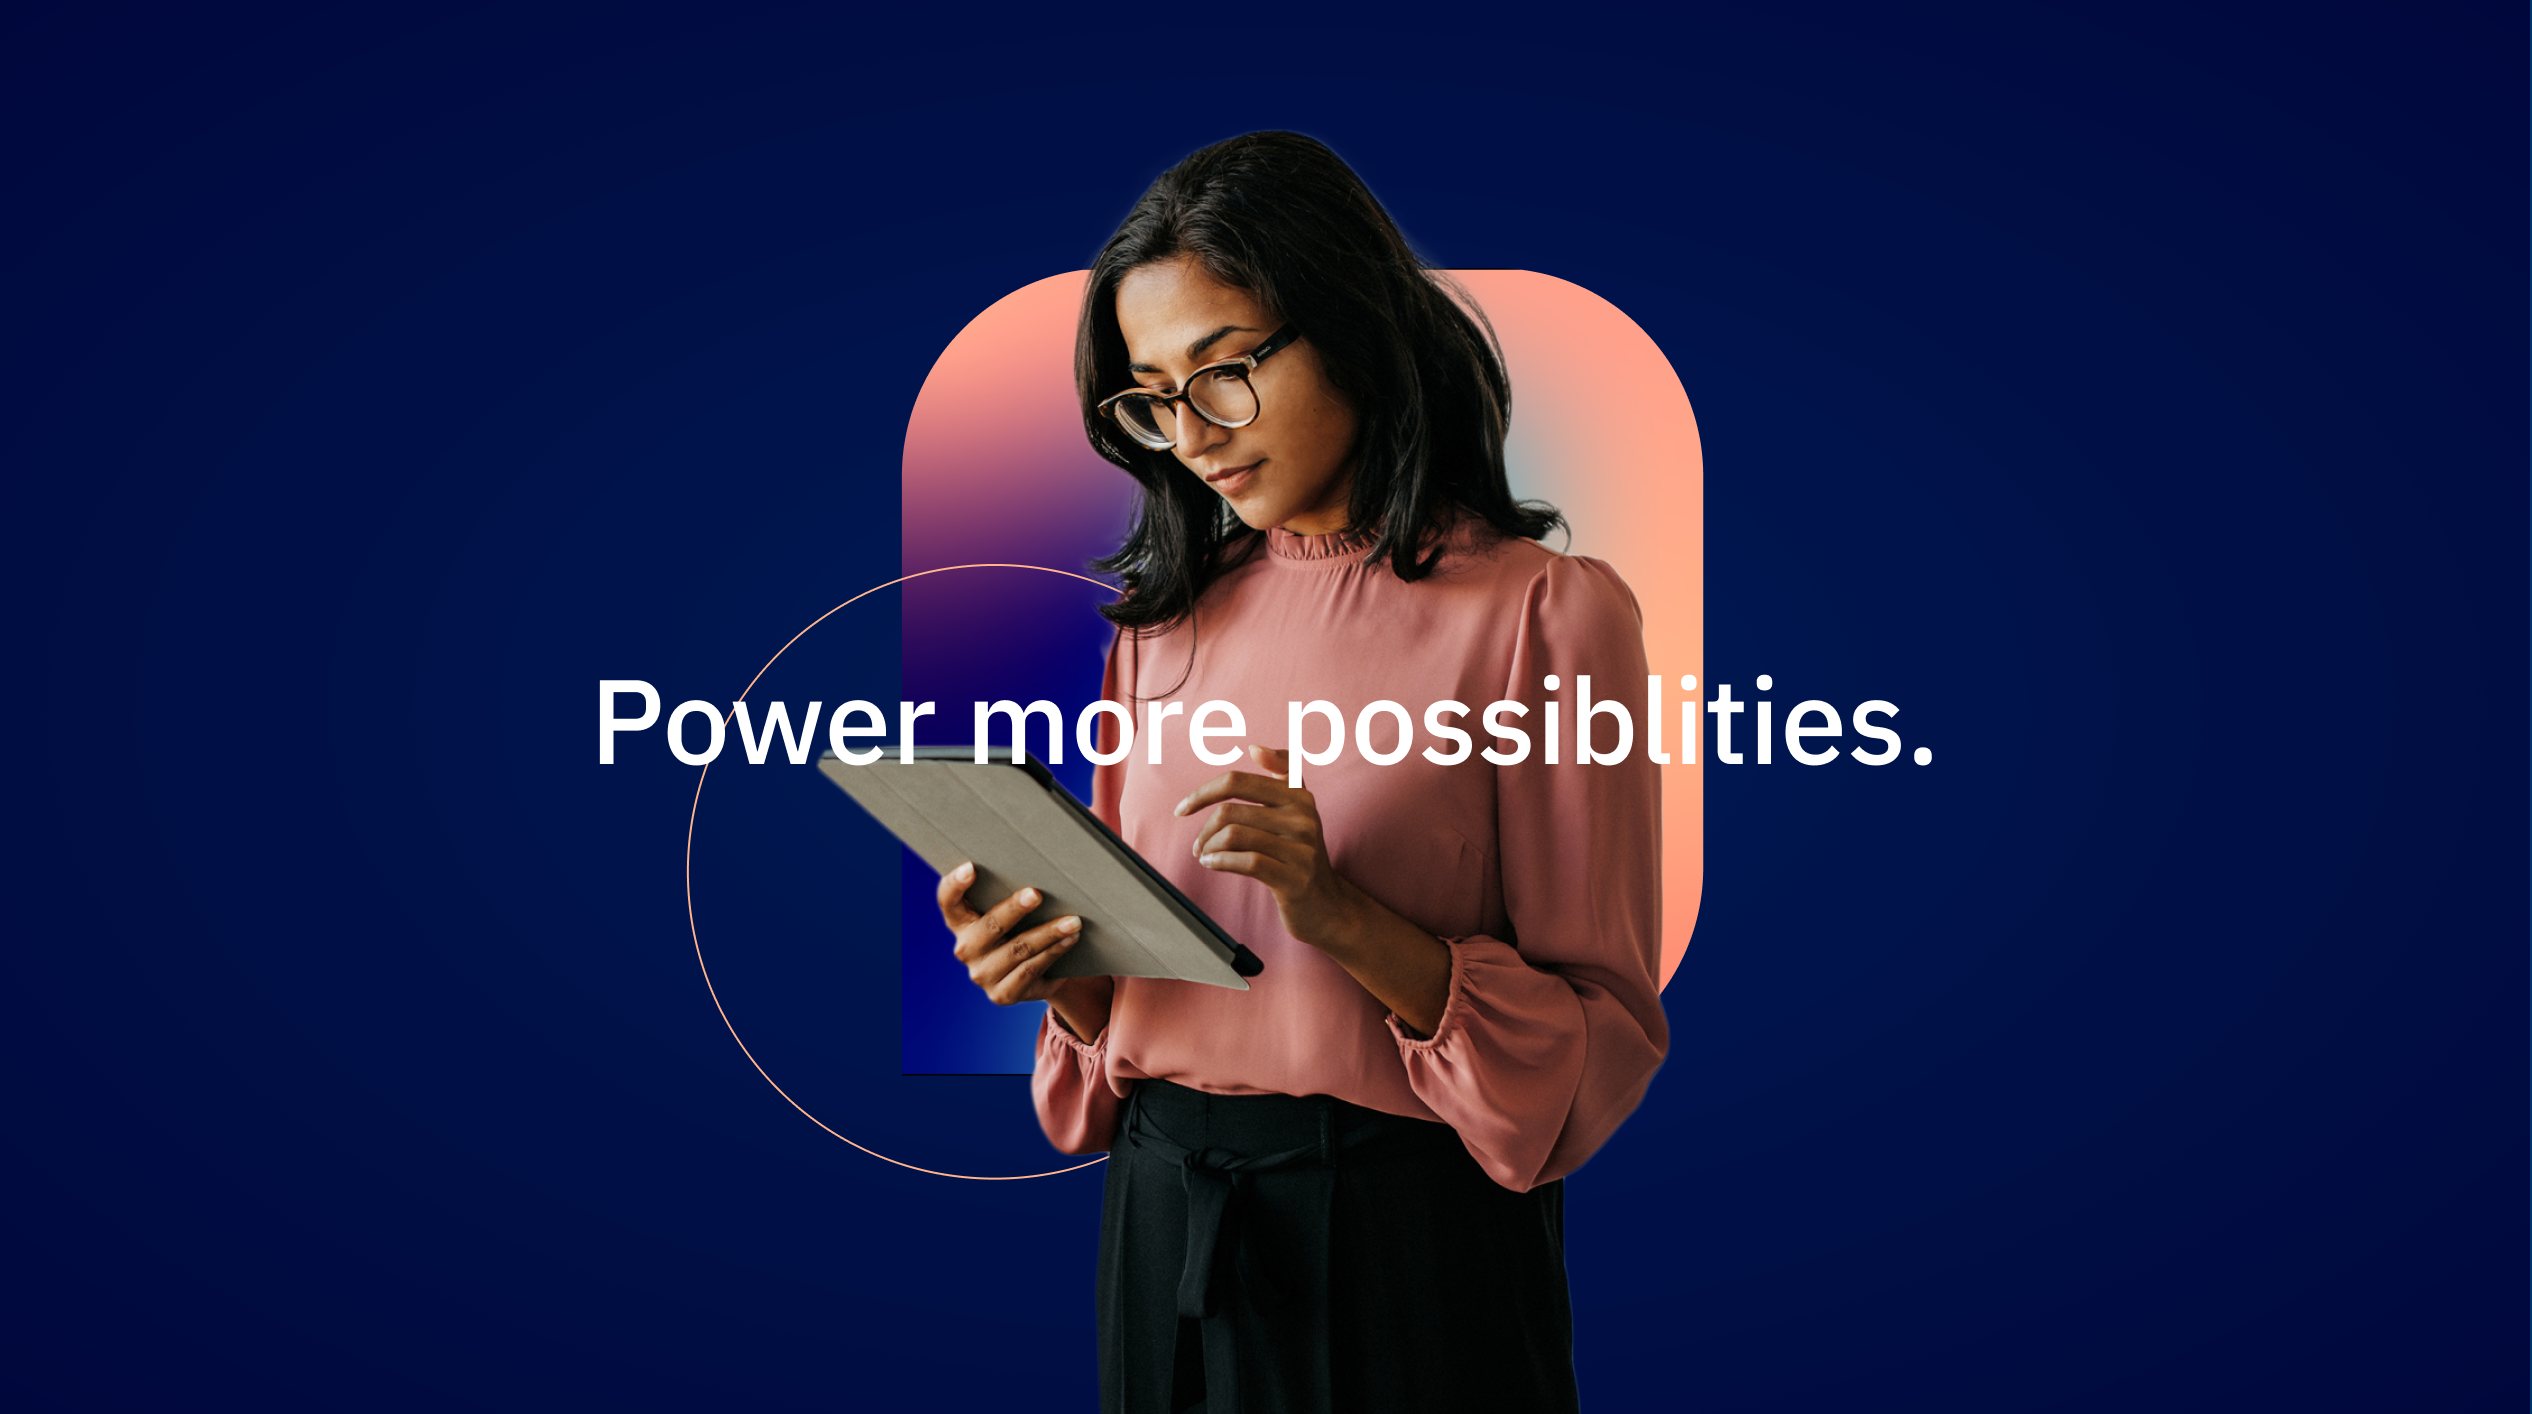 Practifi tagline over woman holding a tablet